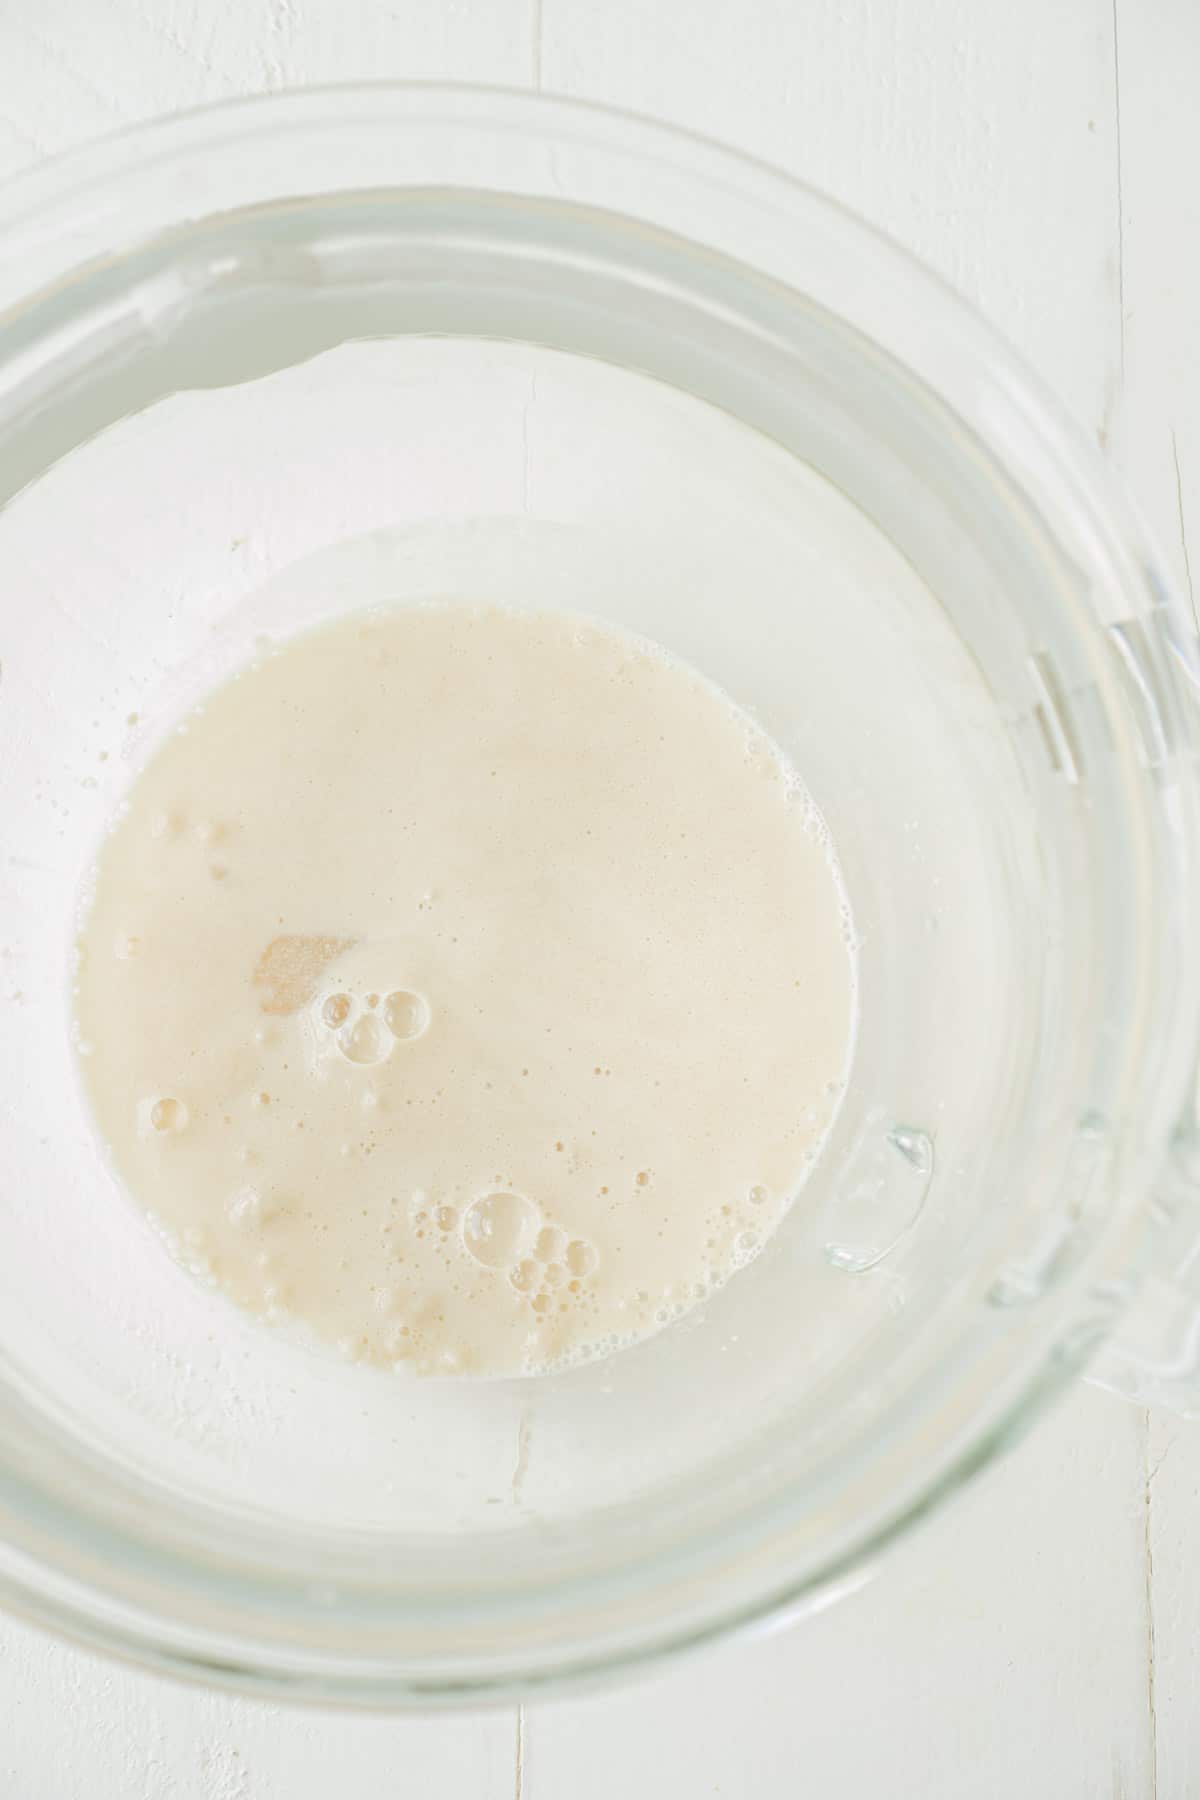 A glass mixing bowl with yeast, water, and sugar.